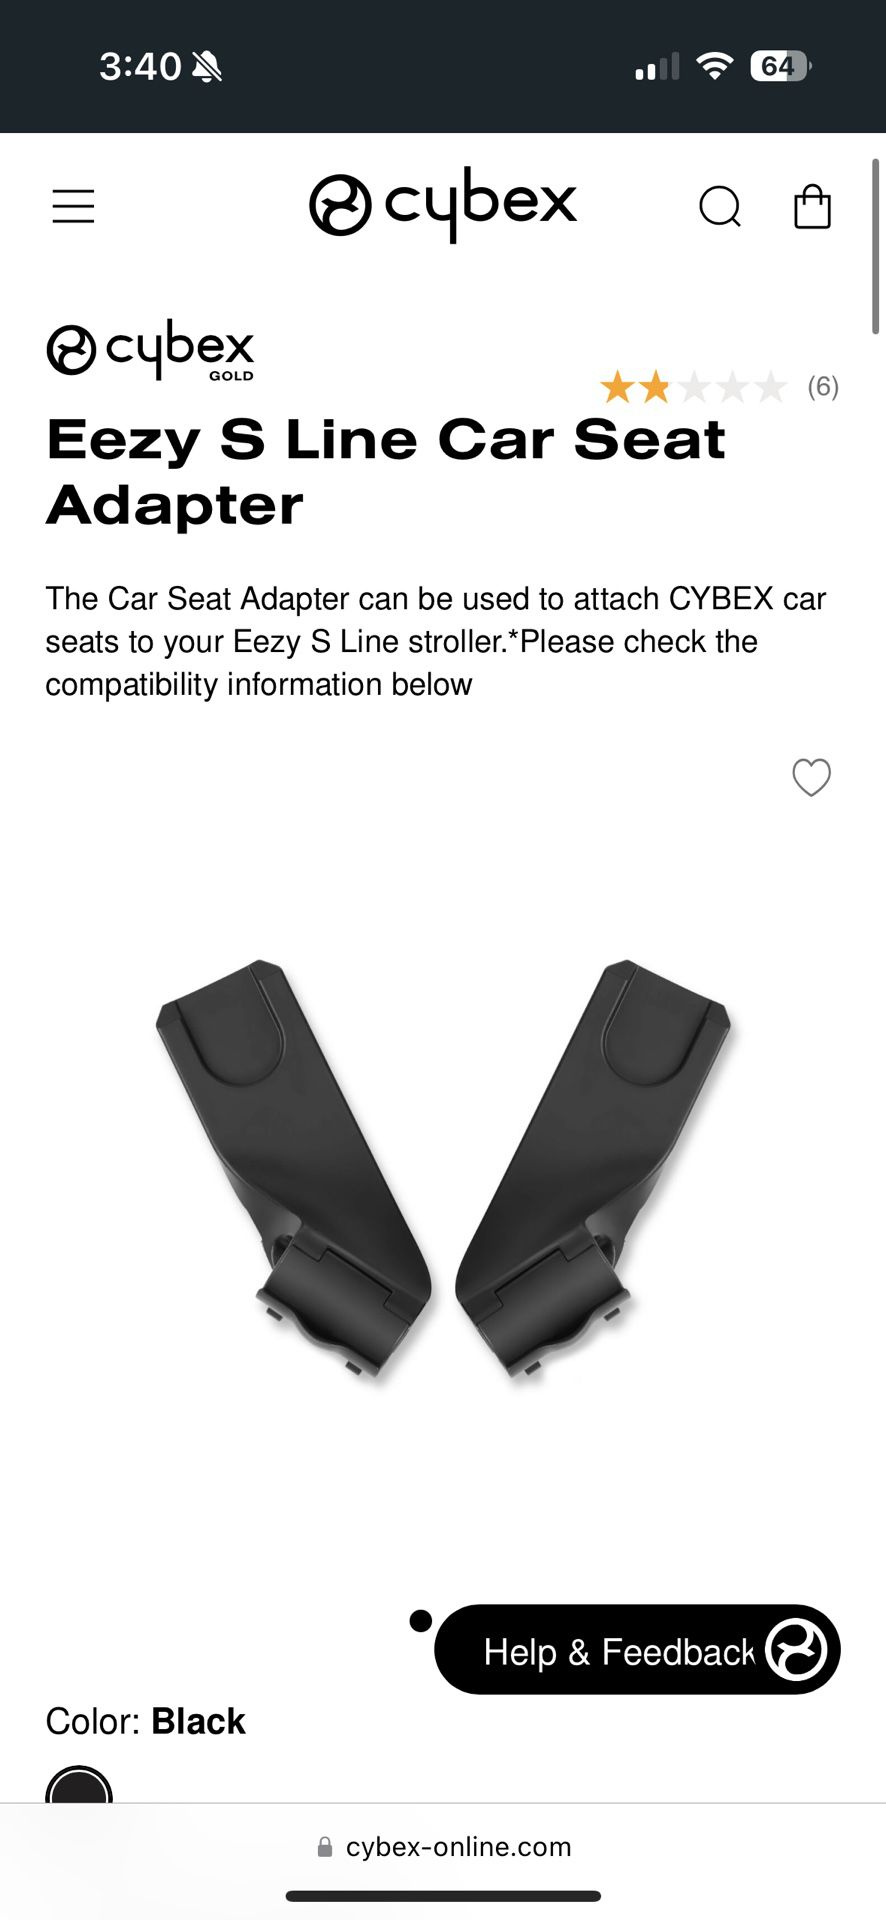 Cybex Car Seat Adapter For Eezy S Strollers